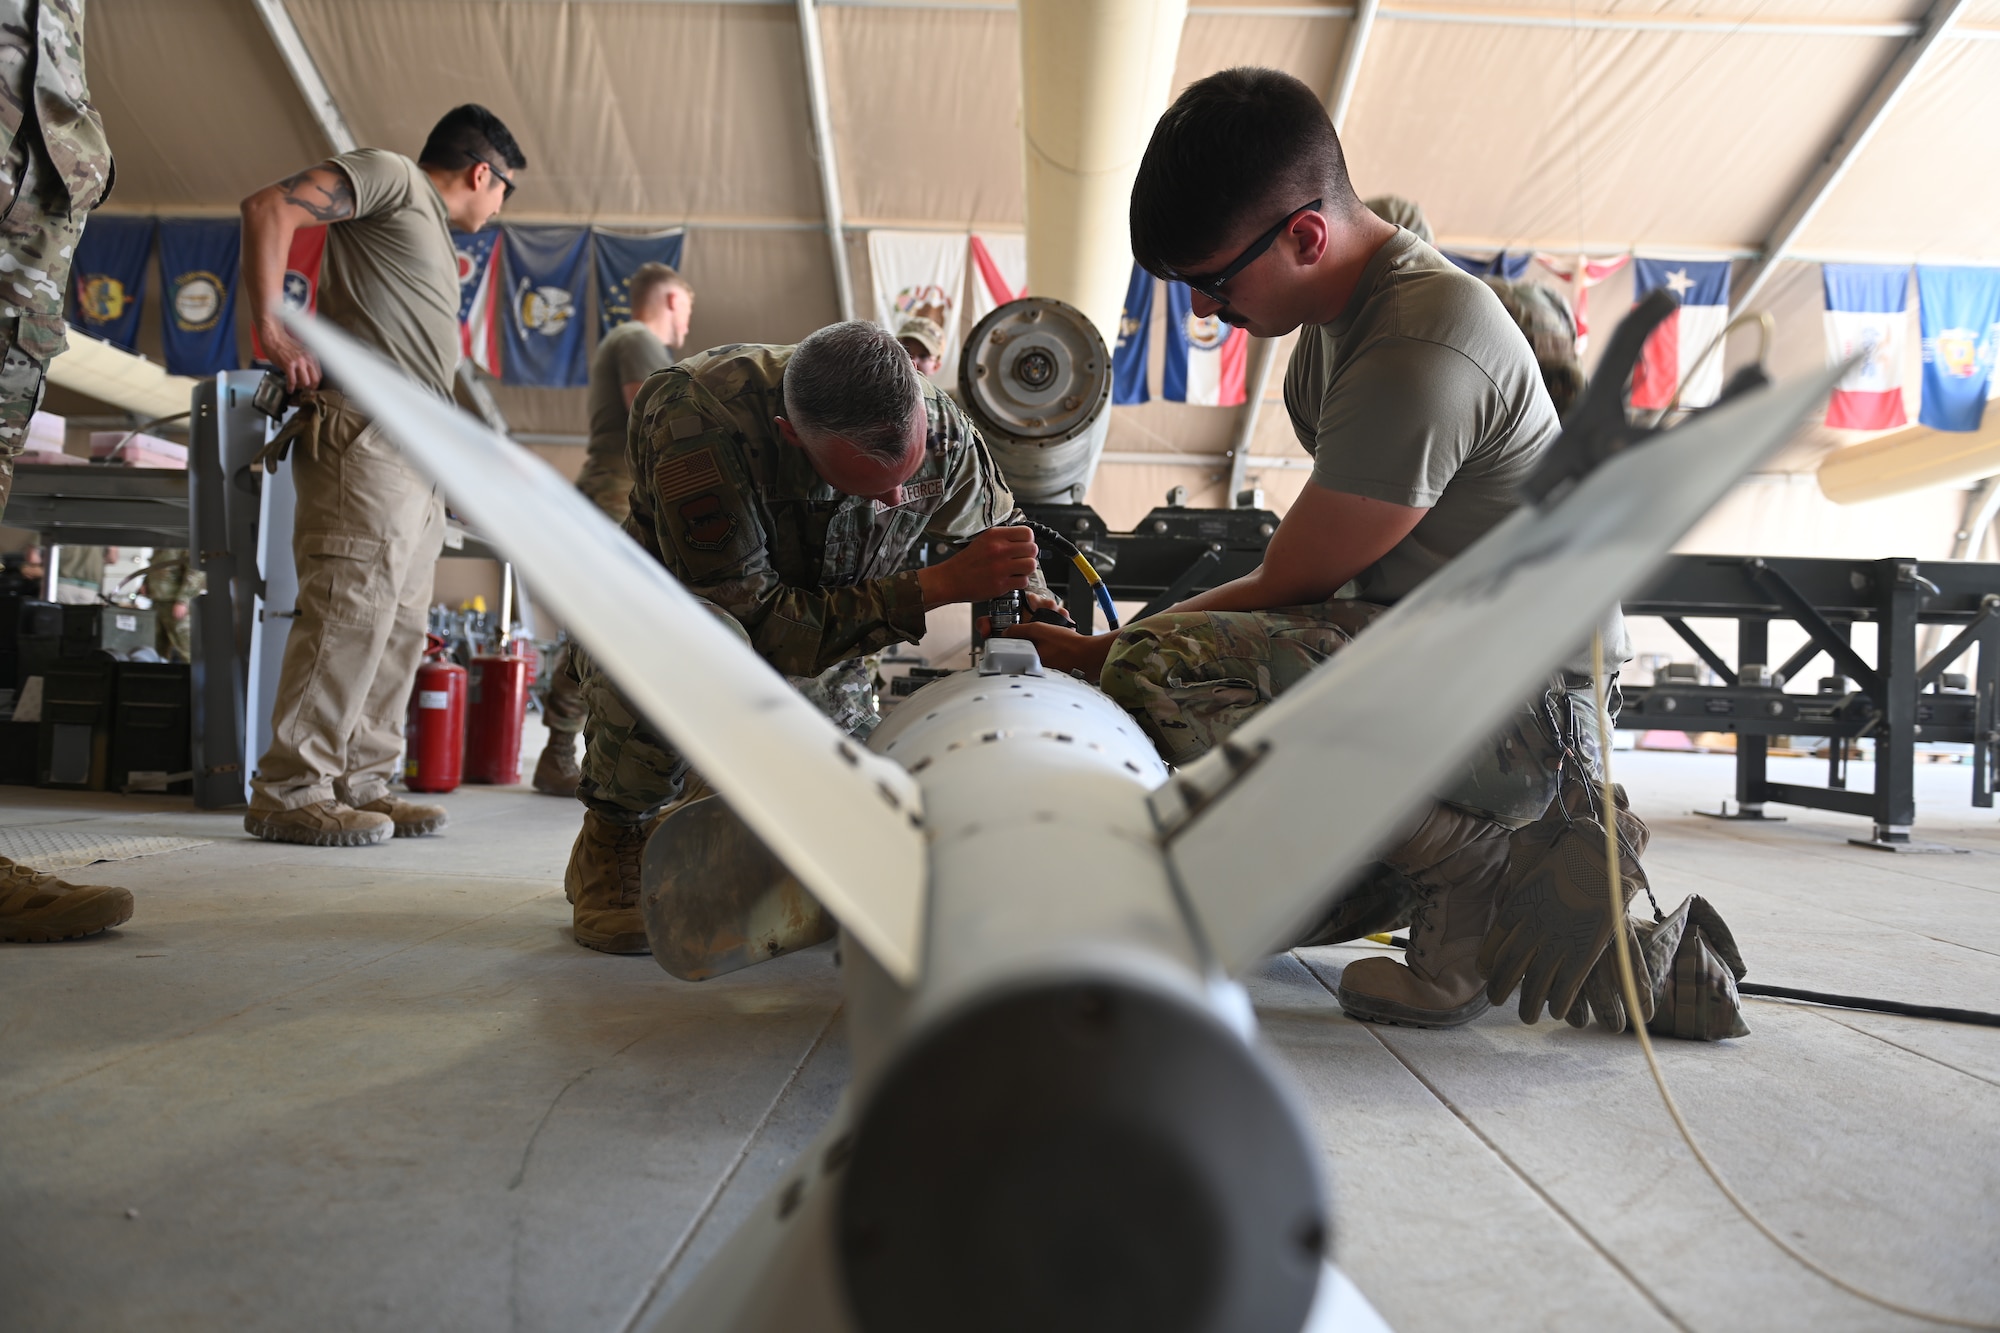 Members of the 332d Air Expeditionary Wing’s leadership team paid a visit to the 389th Expeditionary Maintenance Squadron to learn about the roles they perform in the fighter wing mission.